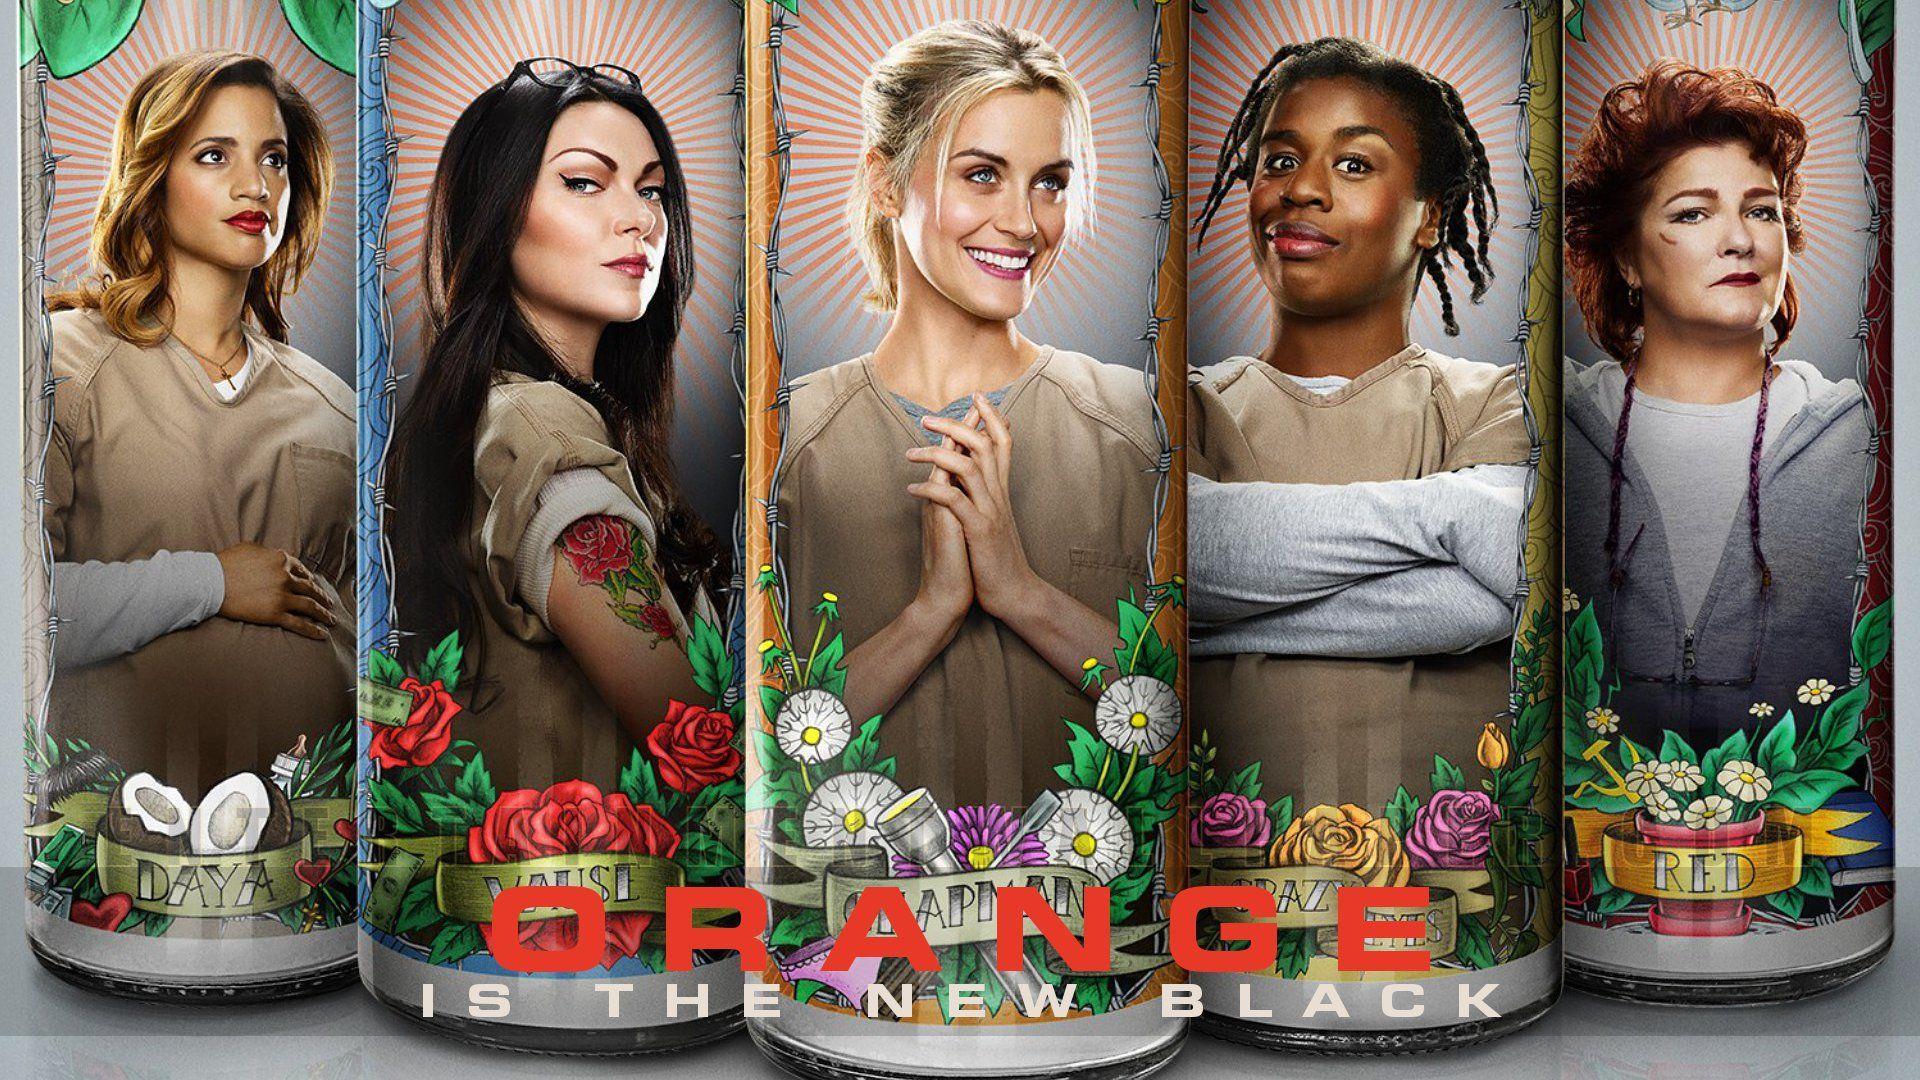 Orange Is the New Black Wallpapers